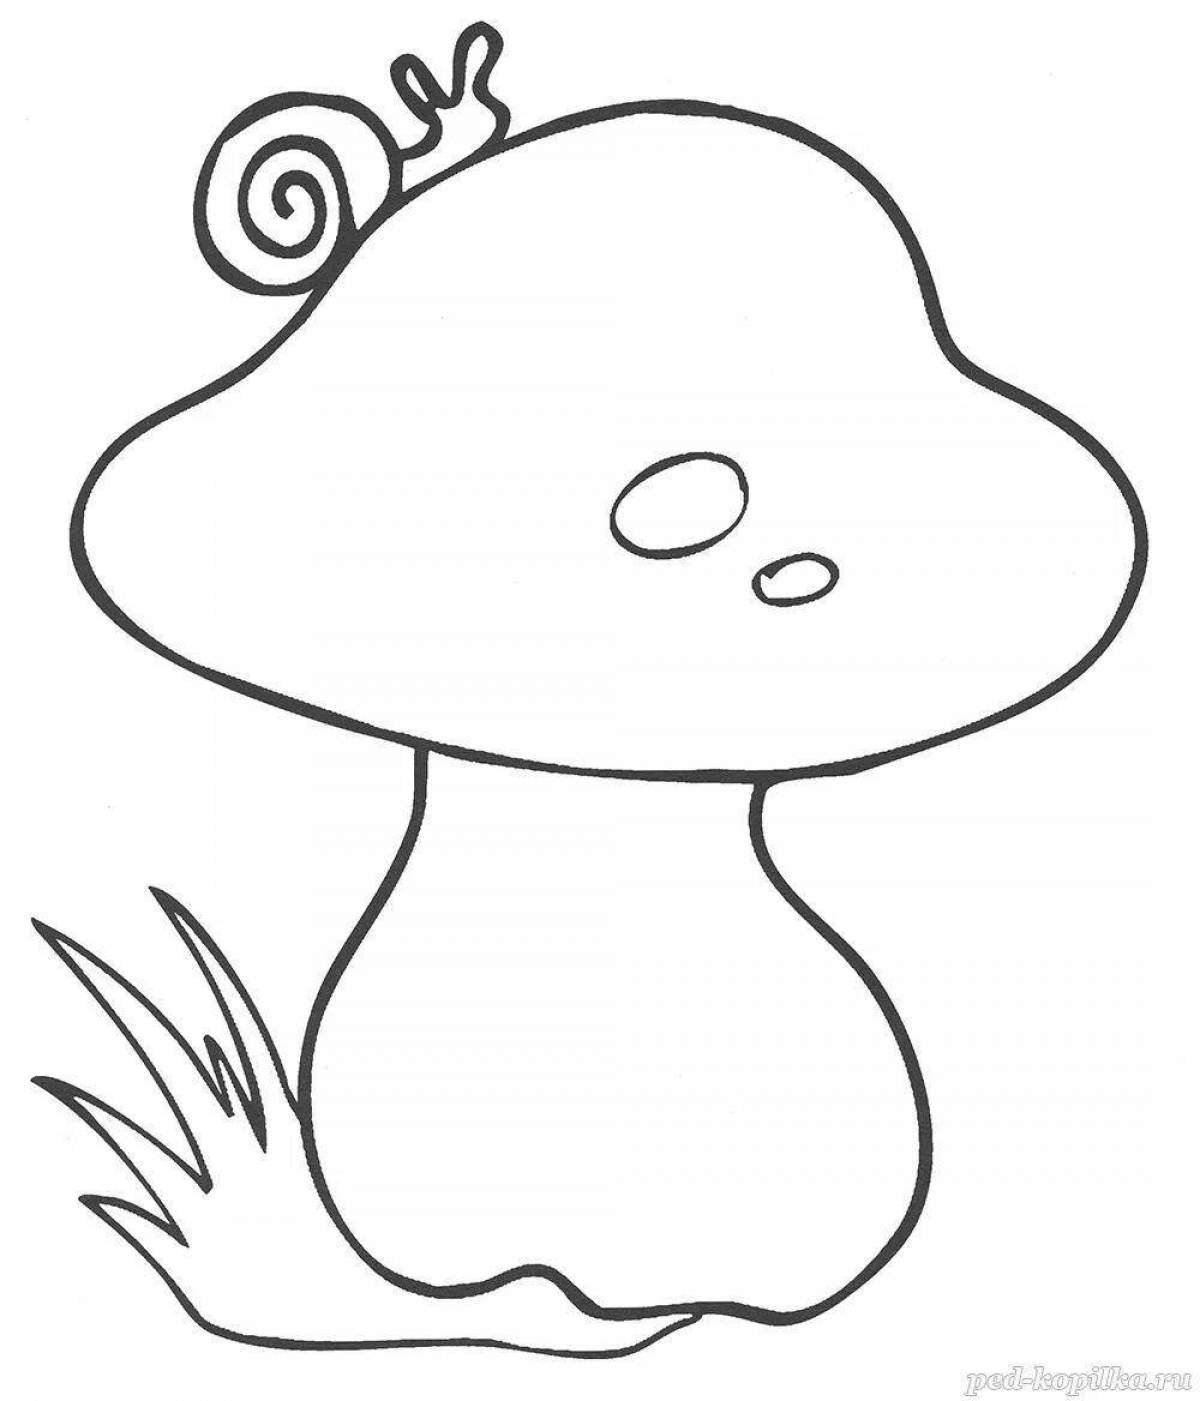 Adorable mushroom coloring pages for 3-4 year olds